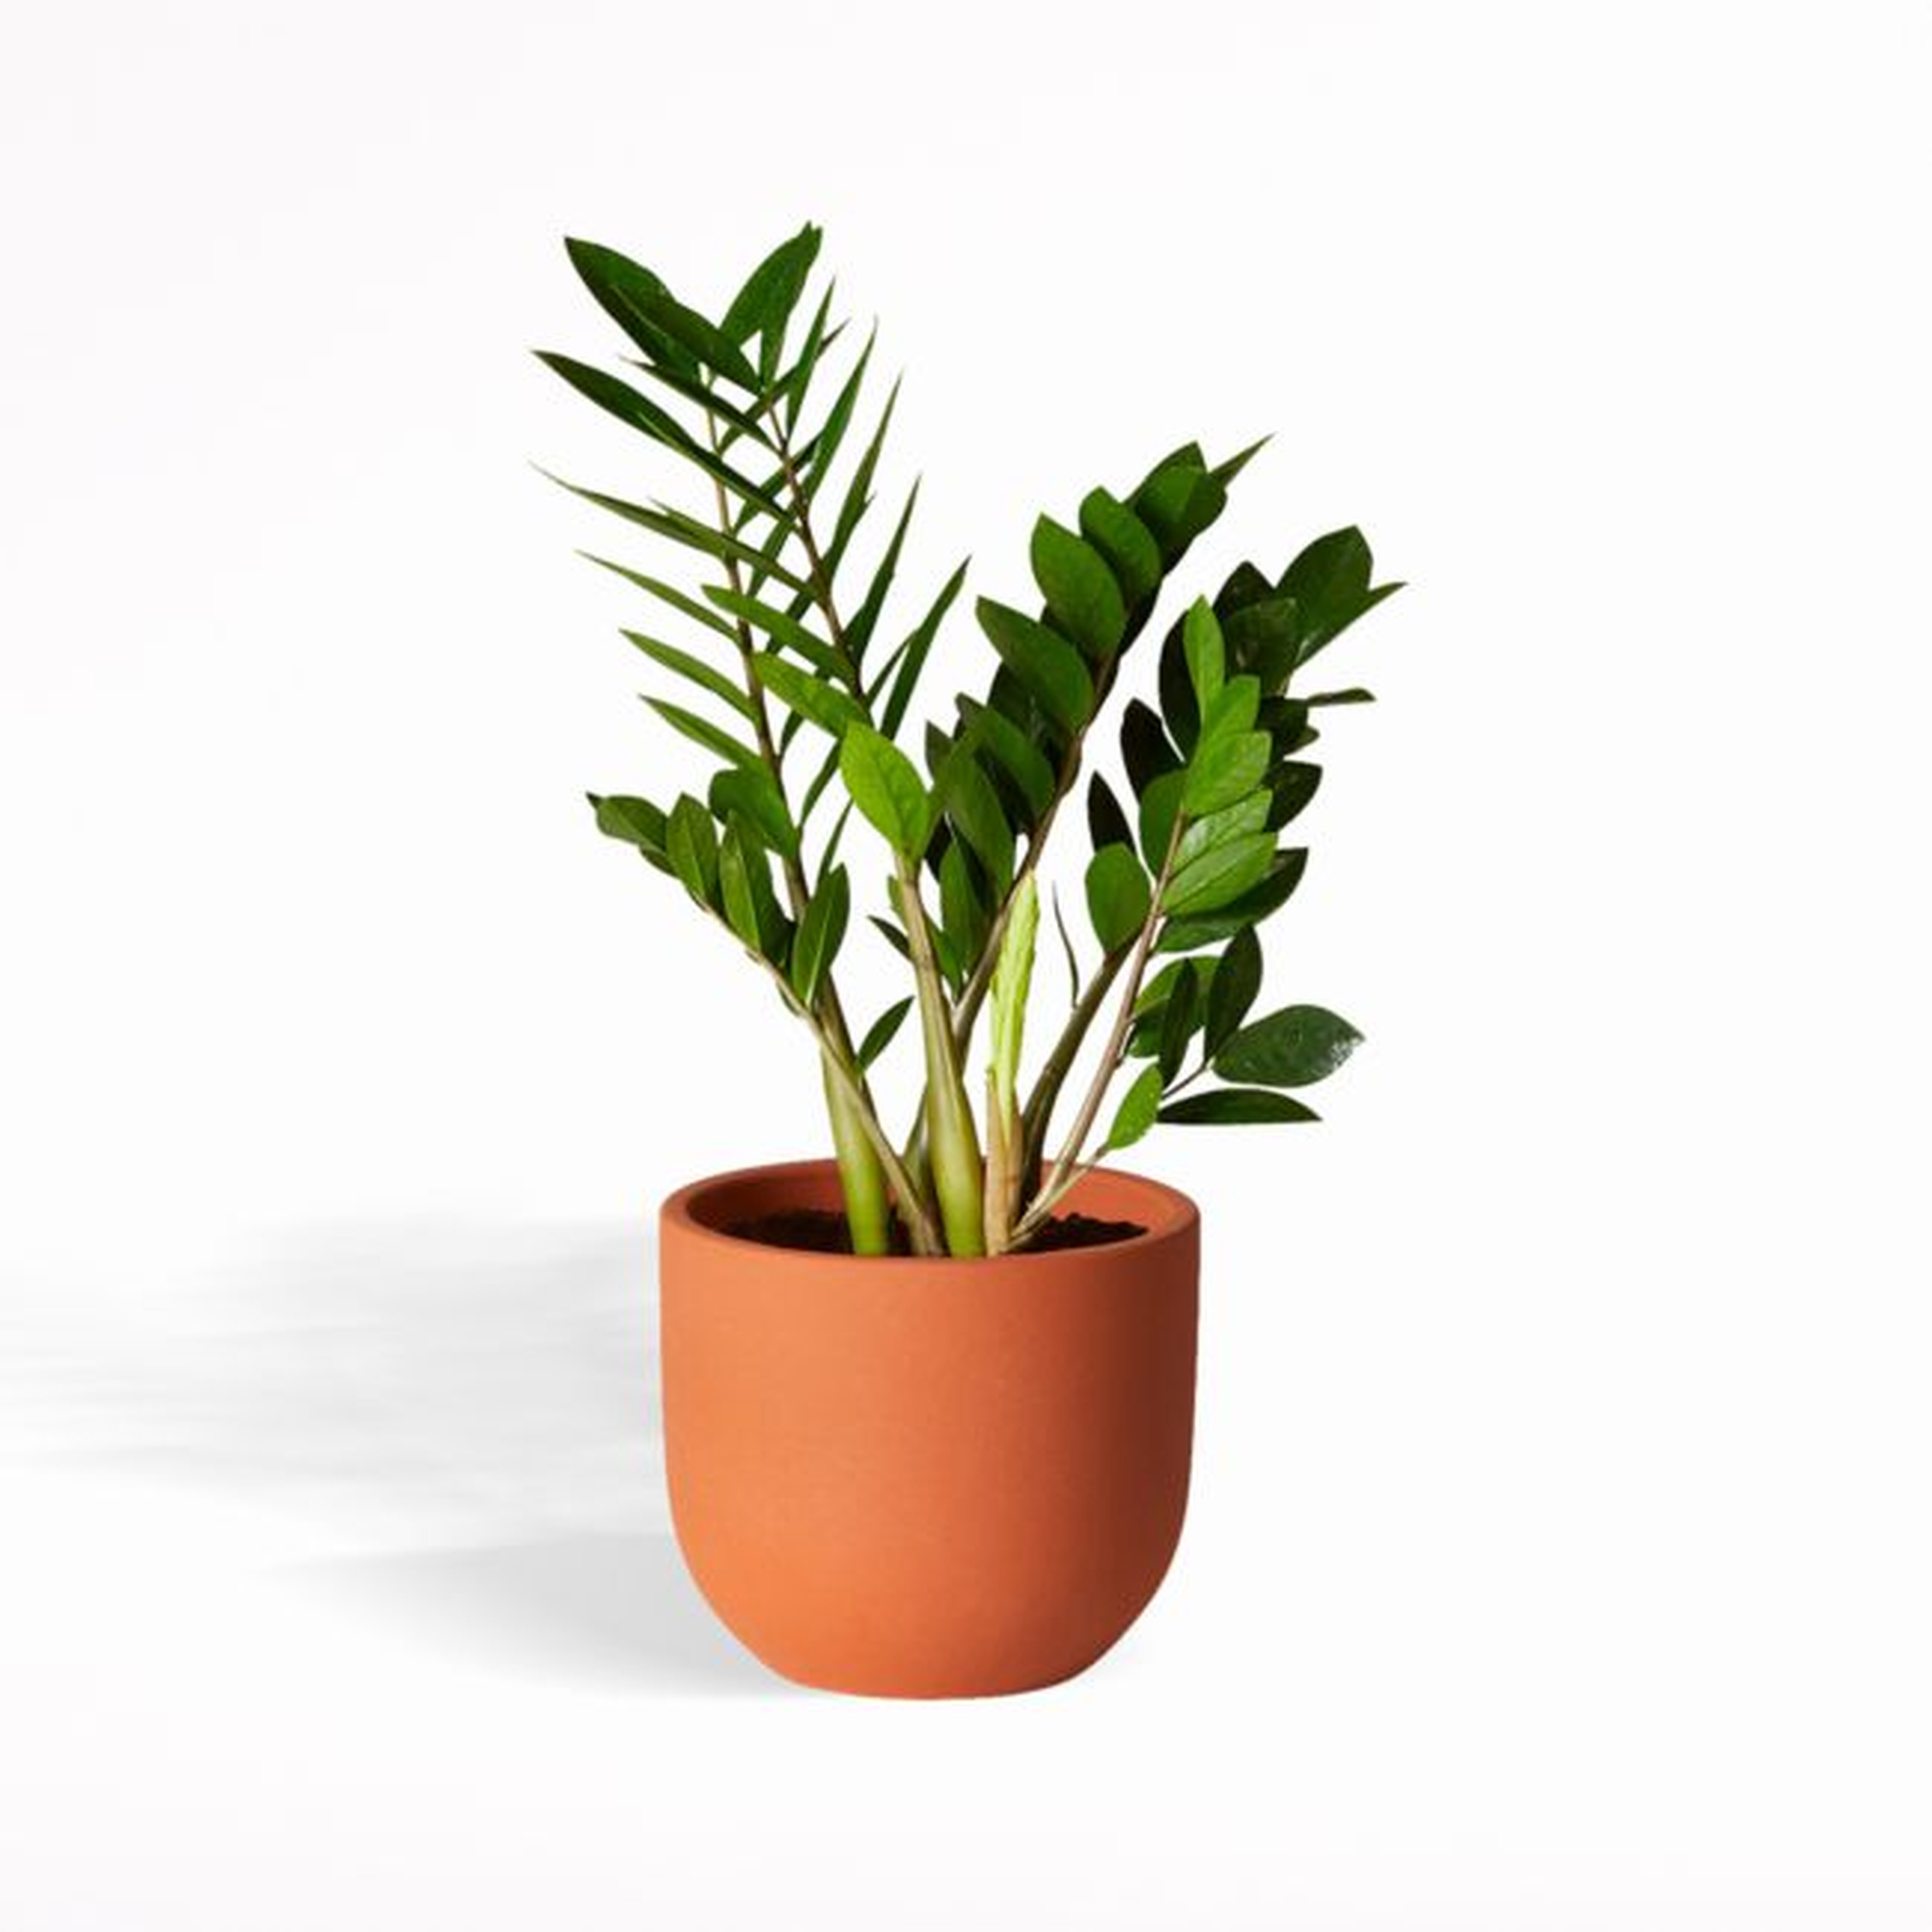 ZZ Plant in Terracotta Pot by The Sill - Crate and Barrel